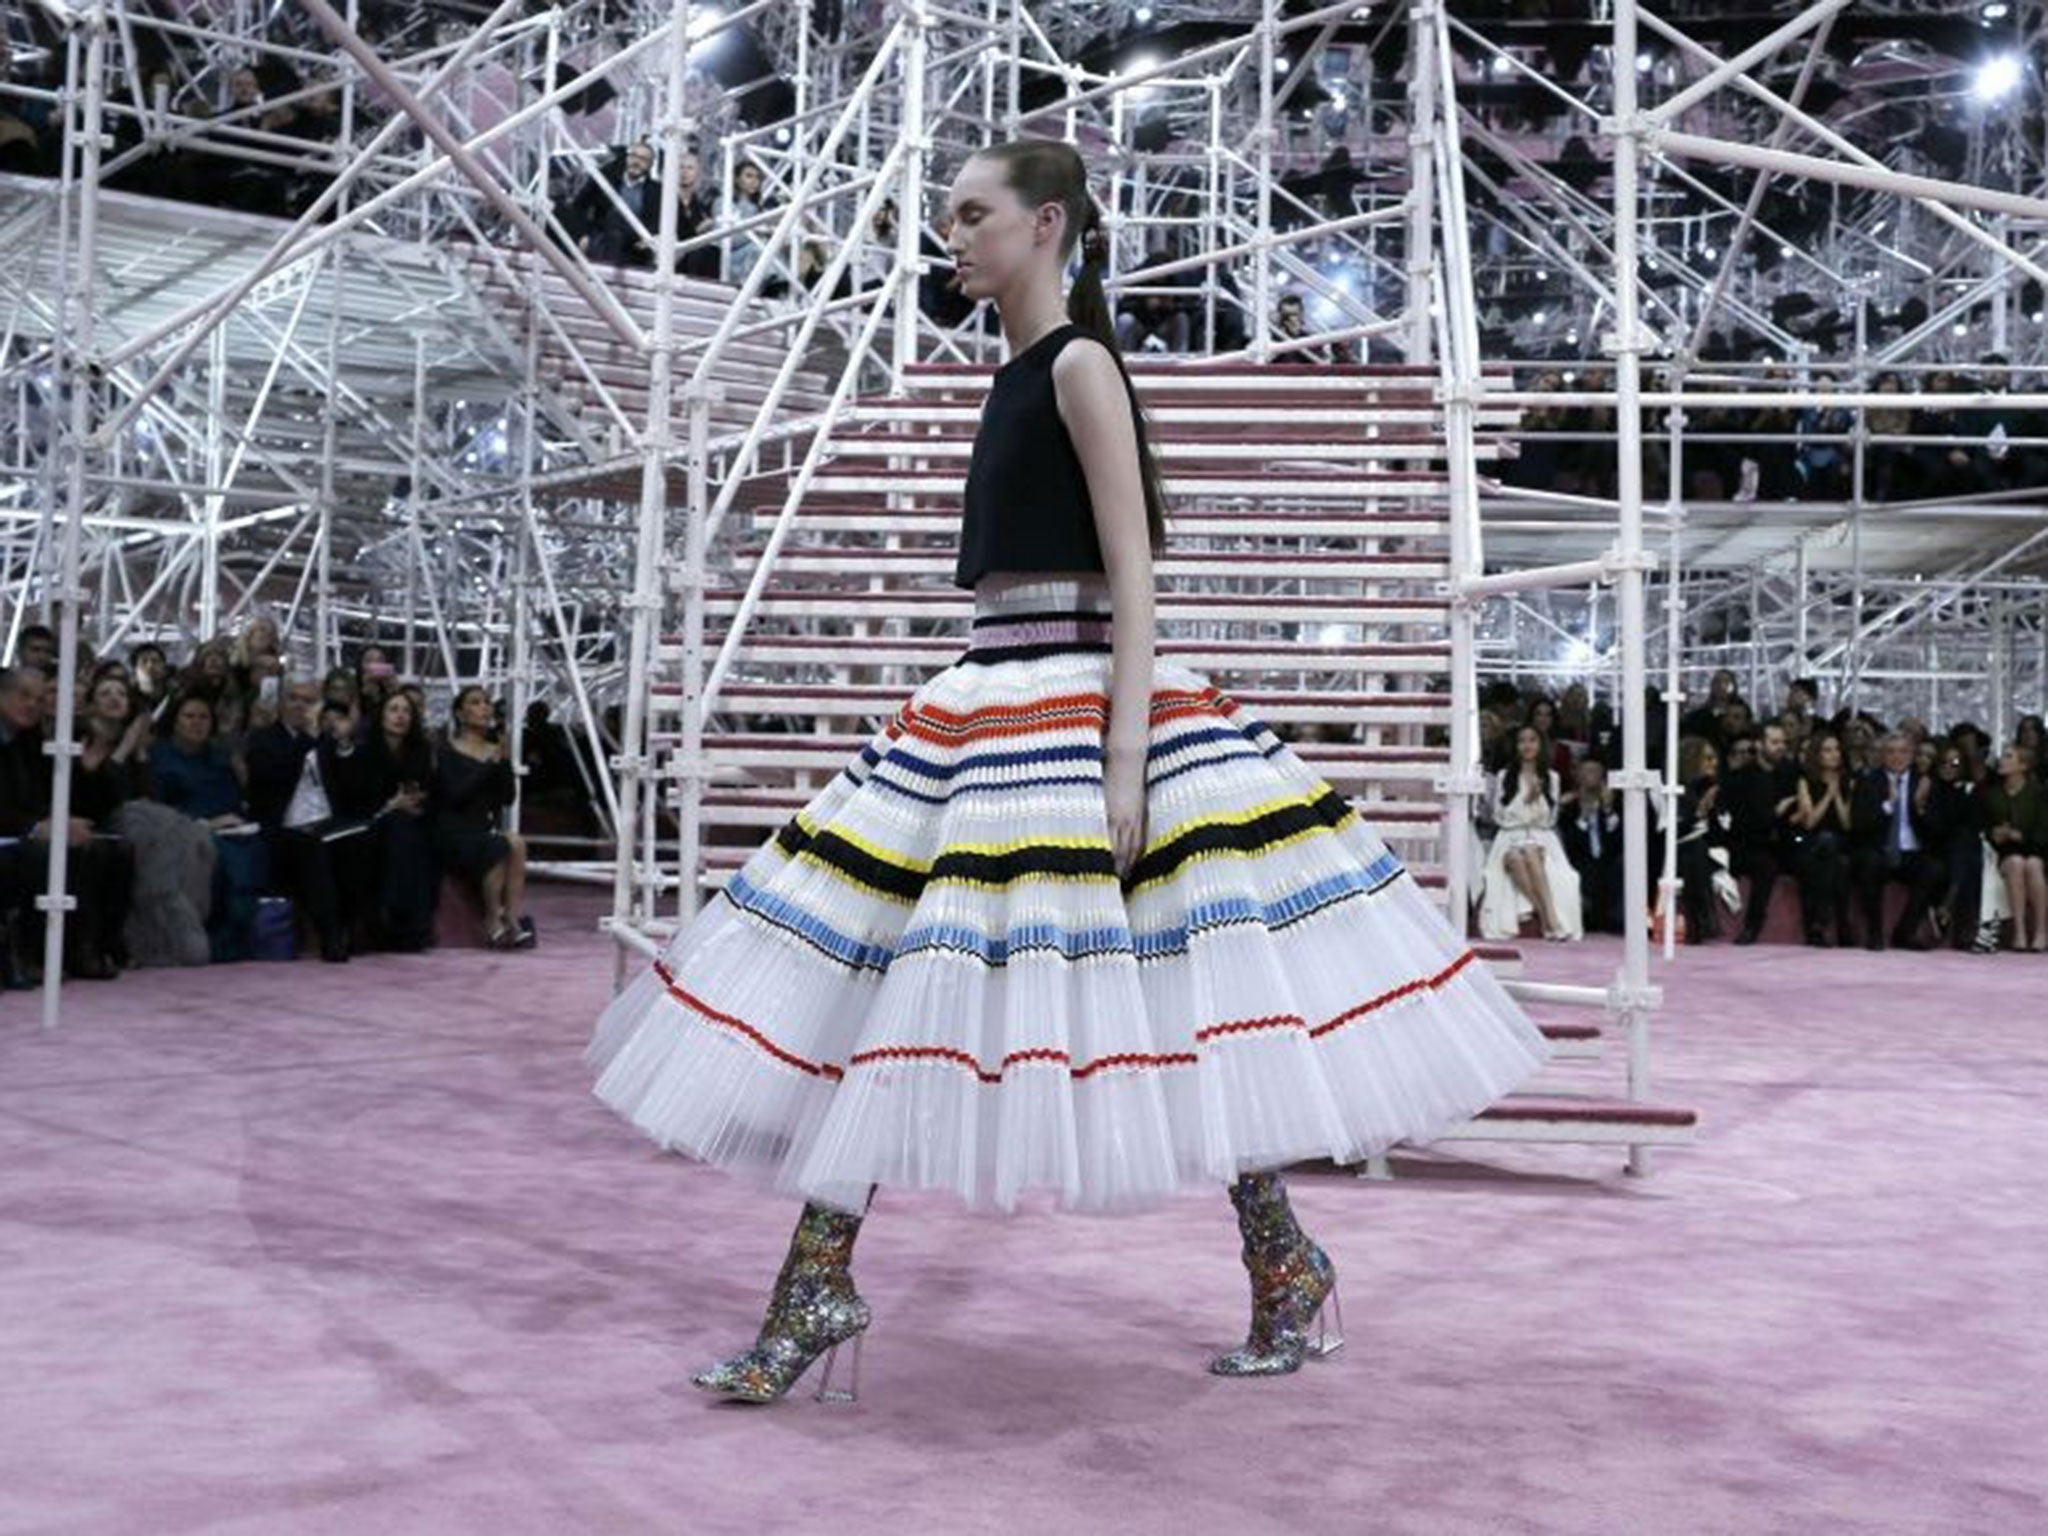 Christian Dior's Spring/Summer 2015 ready-to-wear fashion collection